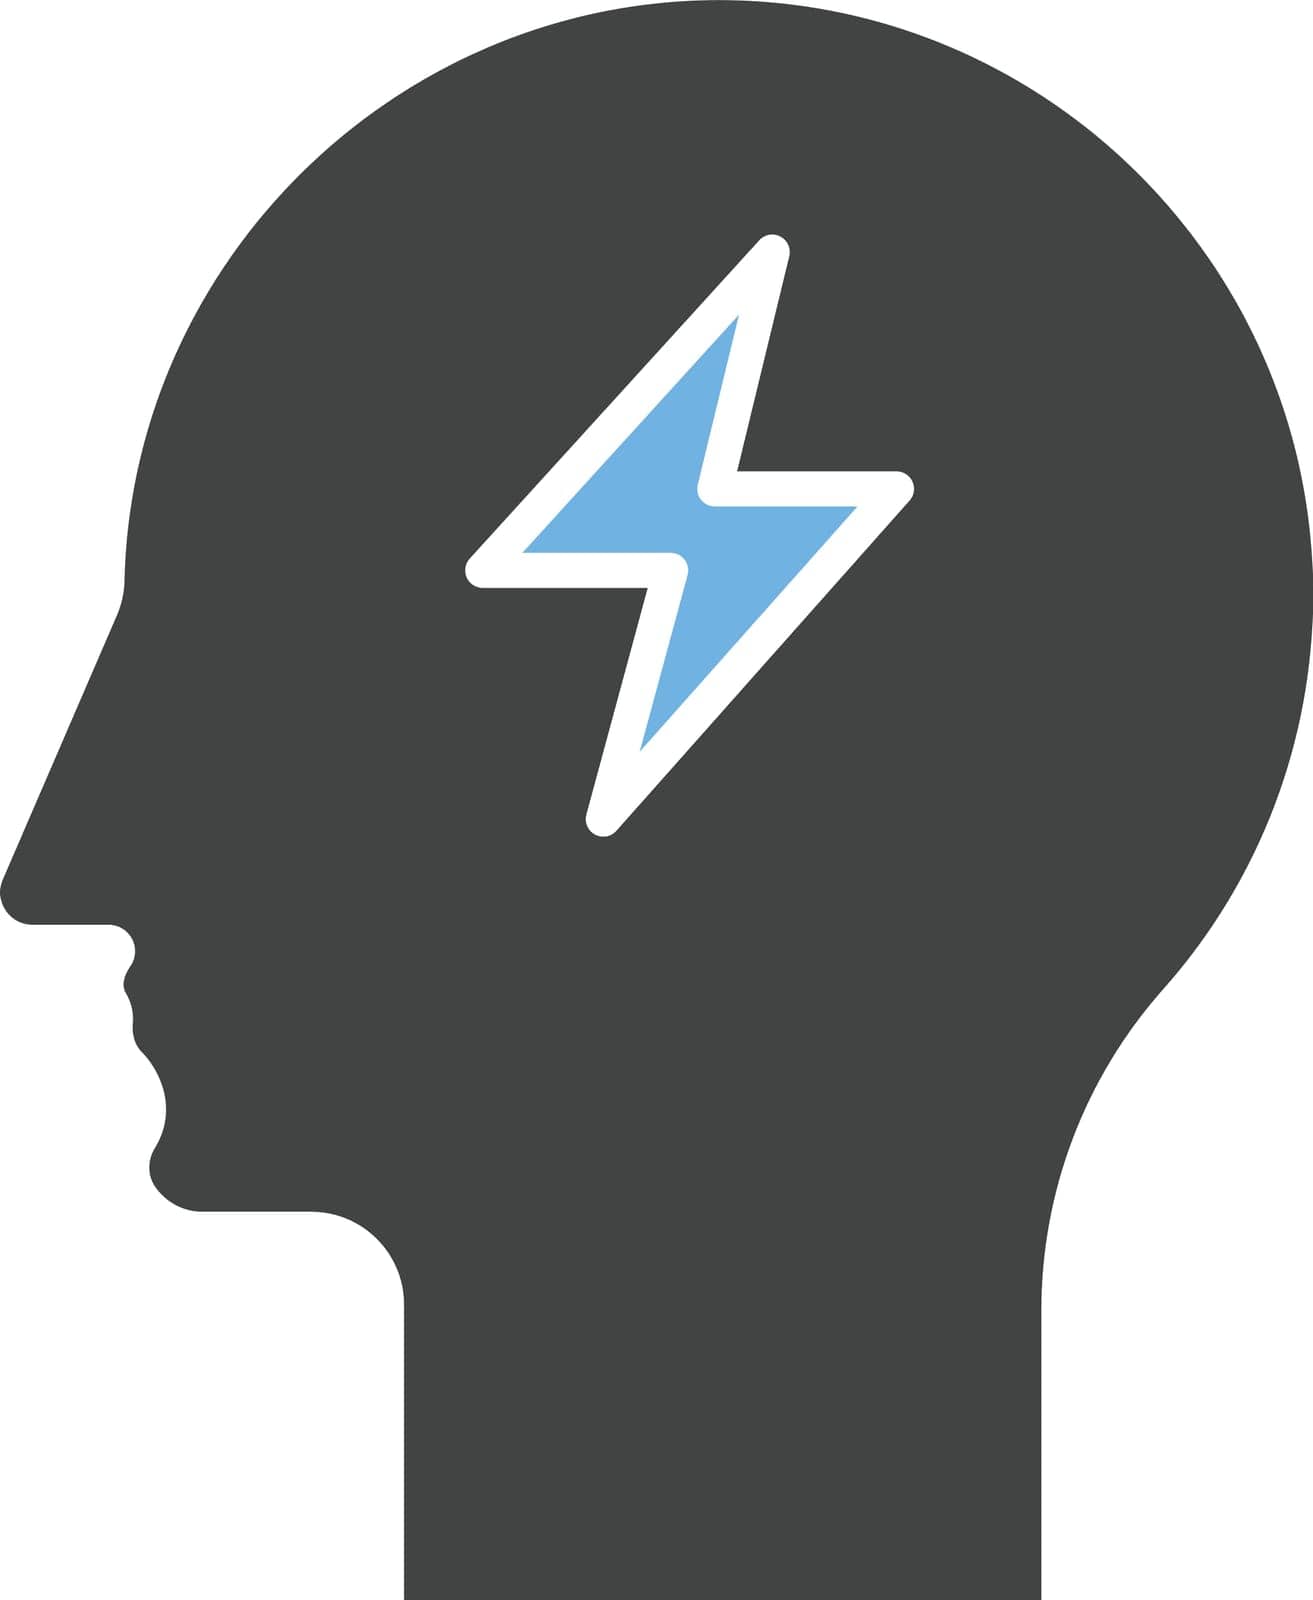 Mind Power icon vector image. by ICONBUNNY